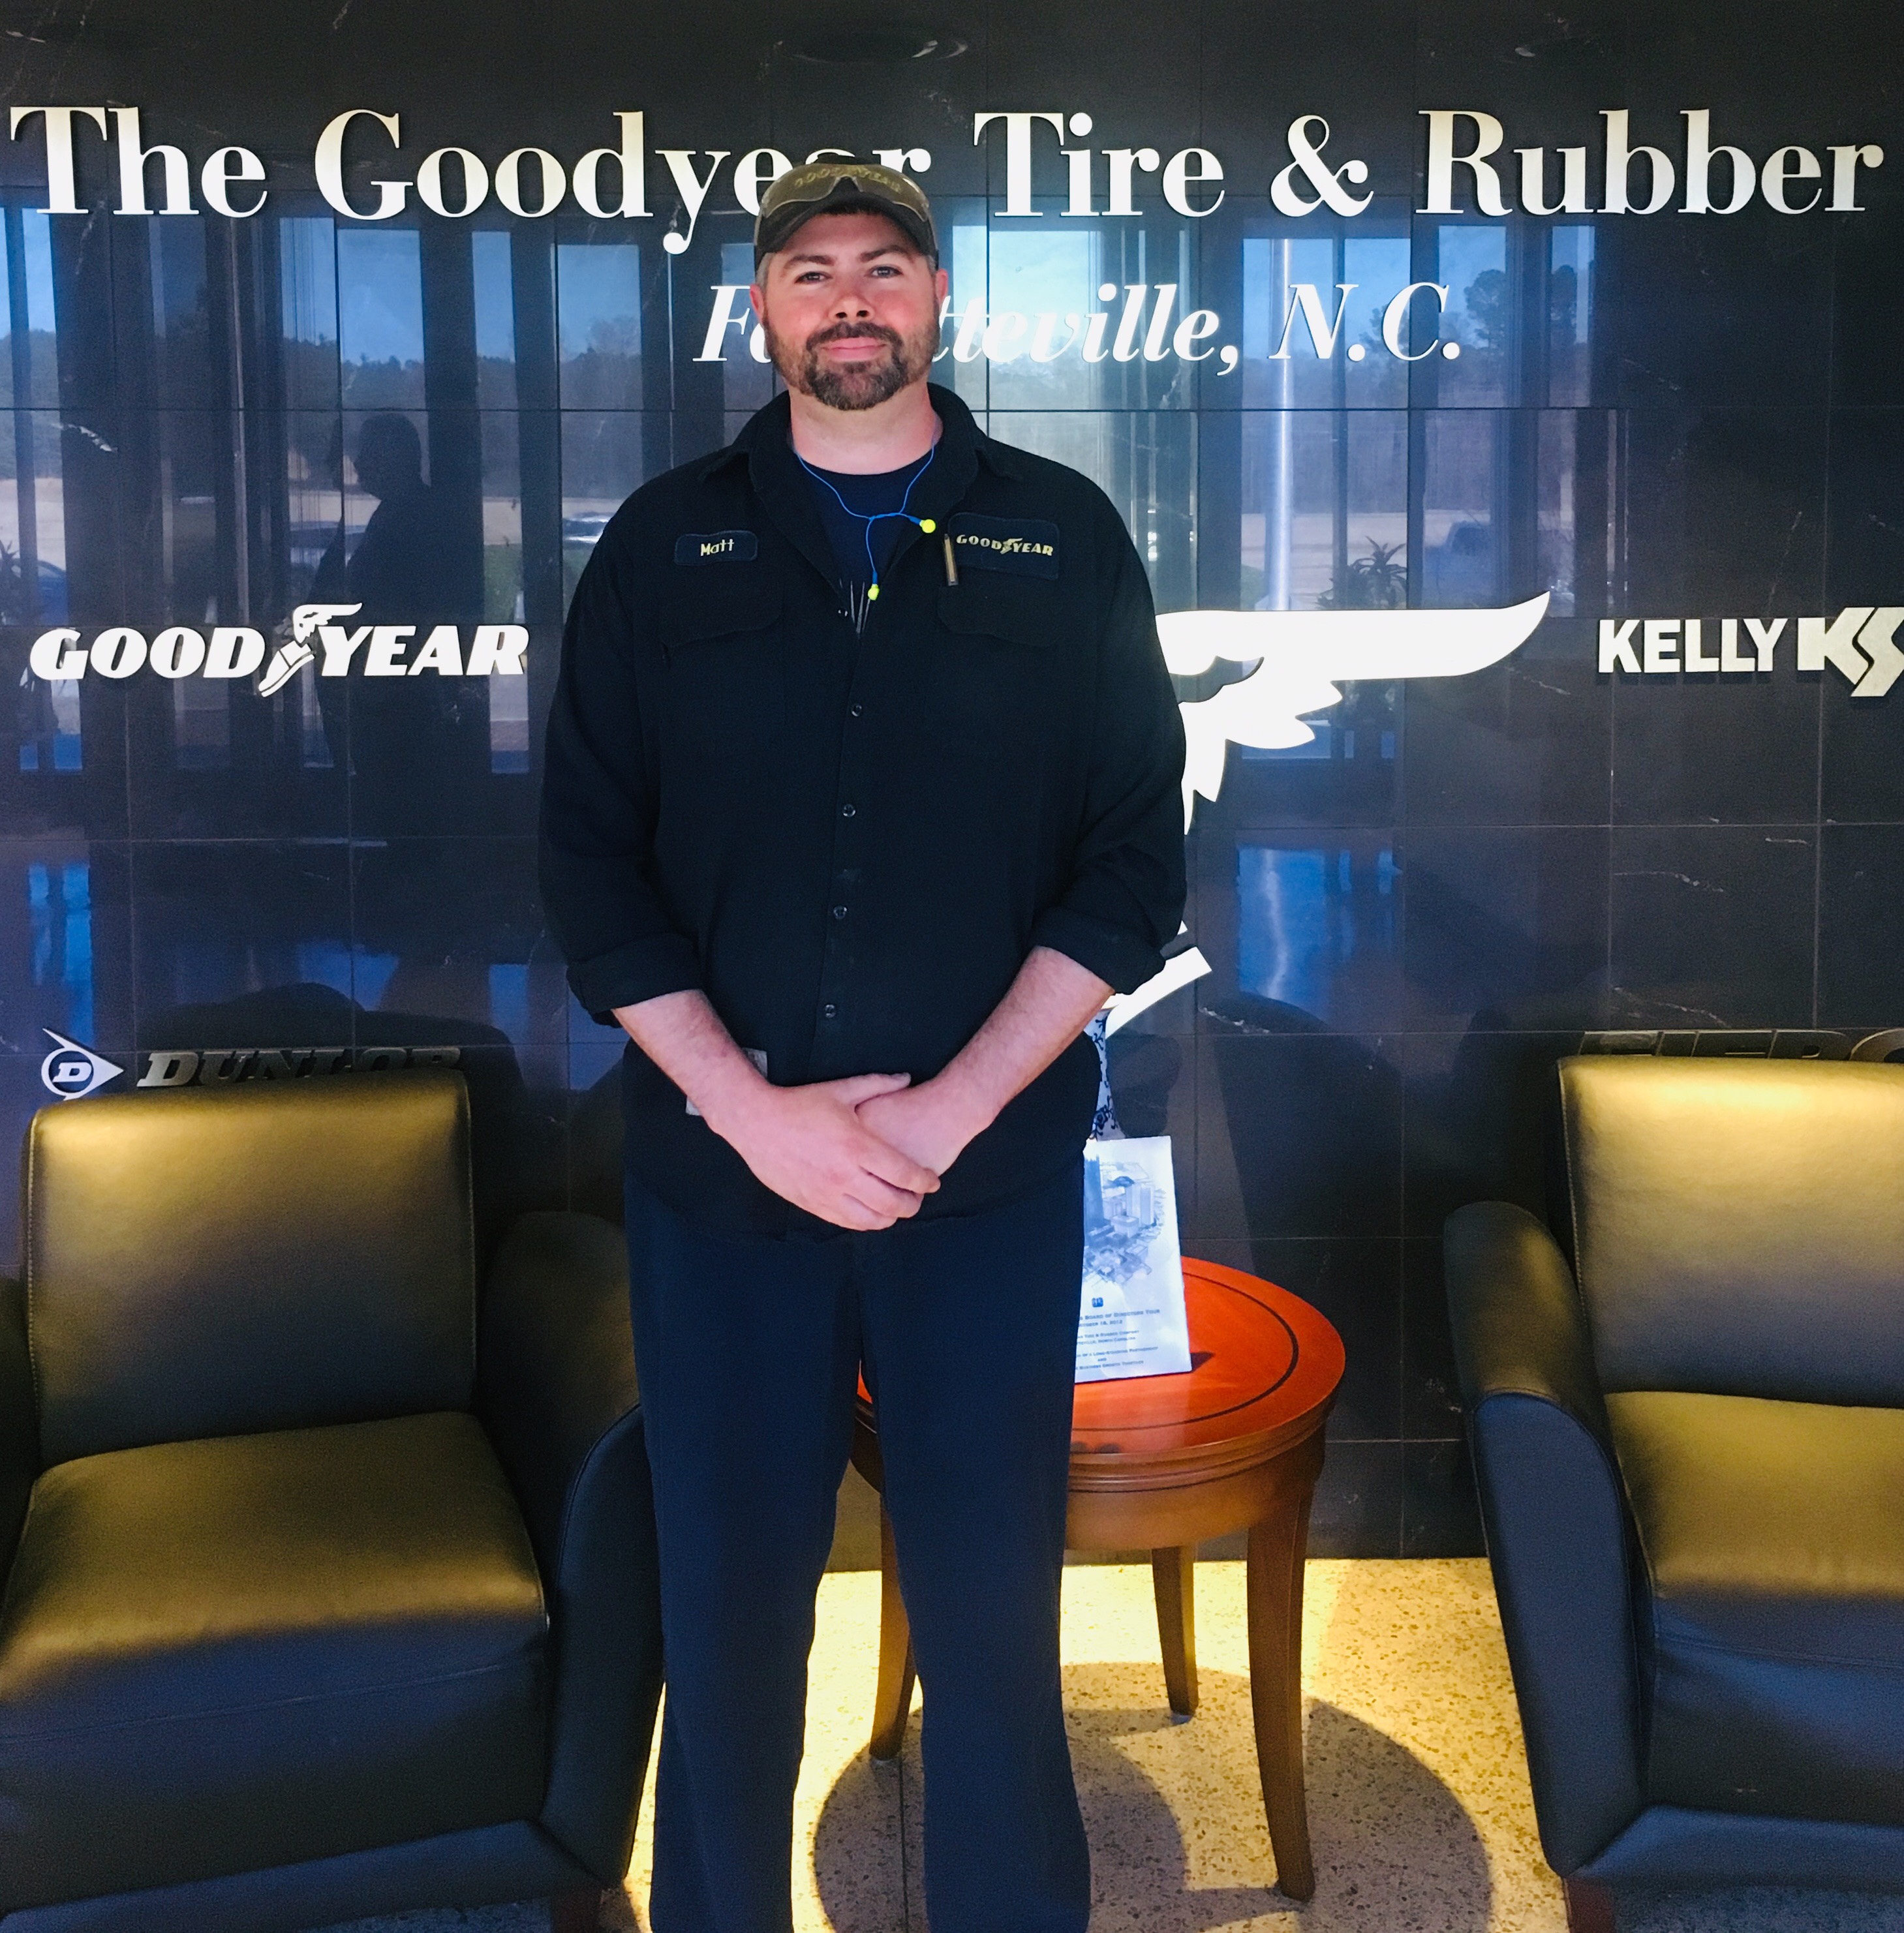 Matt Bower standing in front of a sign for Goodyear Tire & Rubber